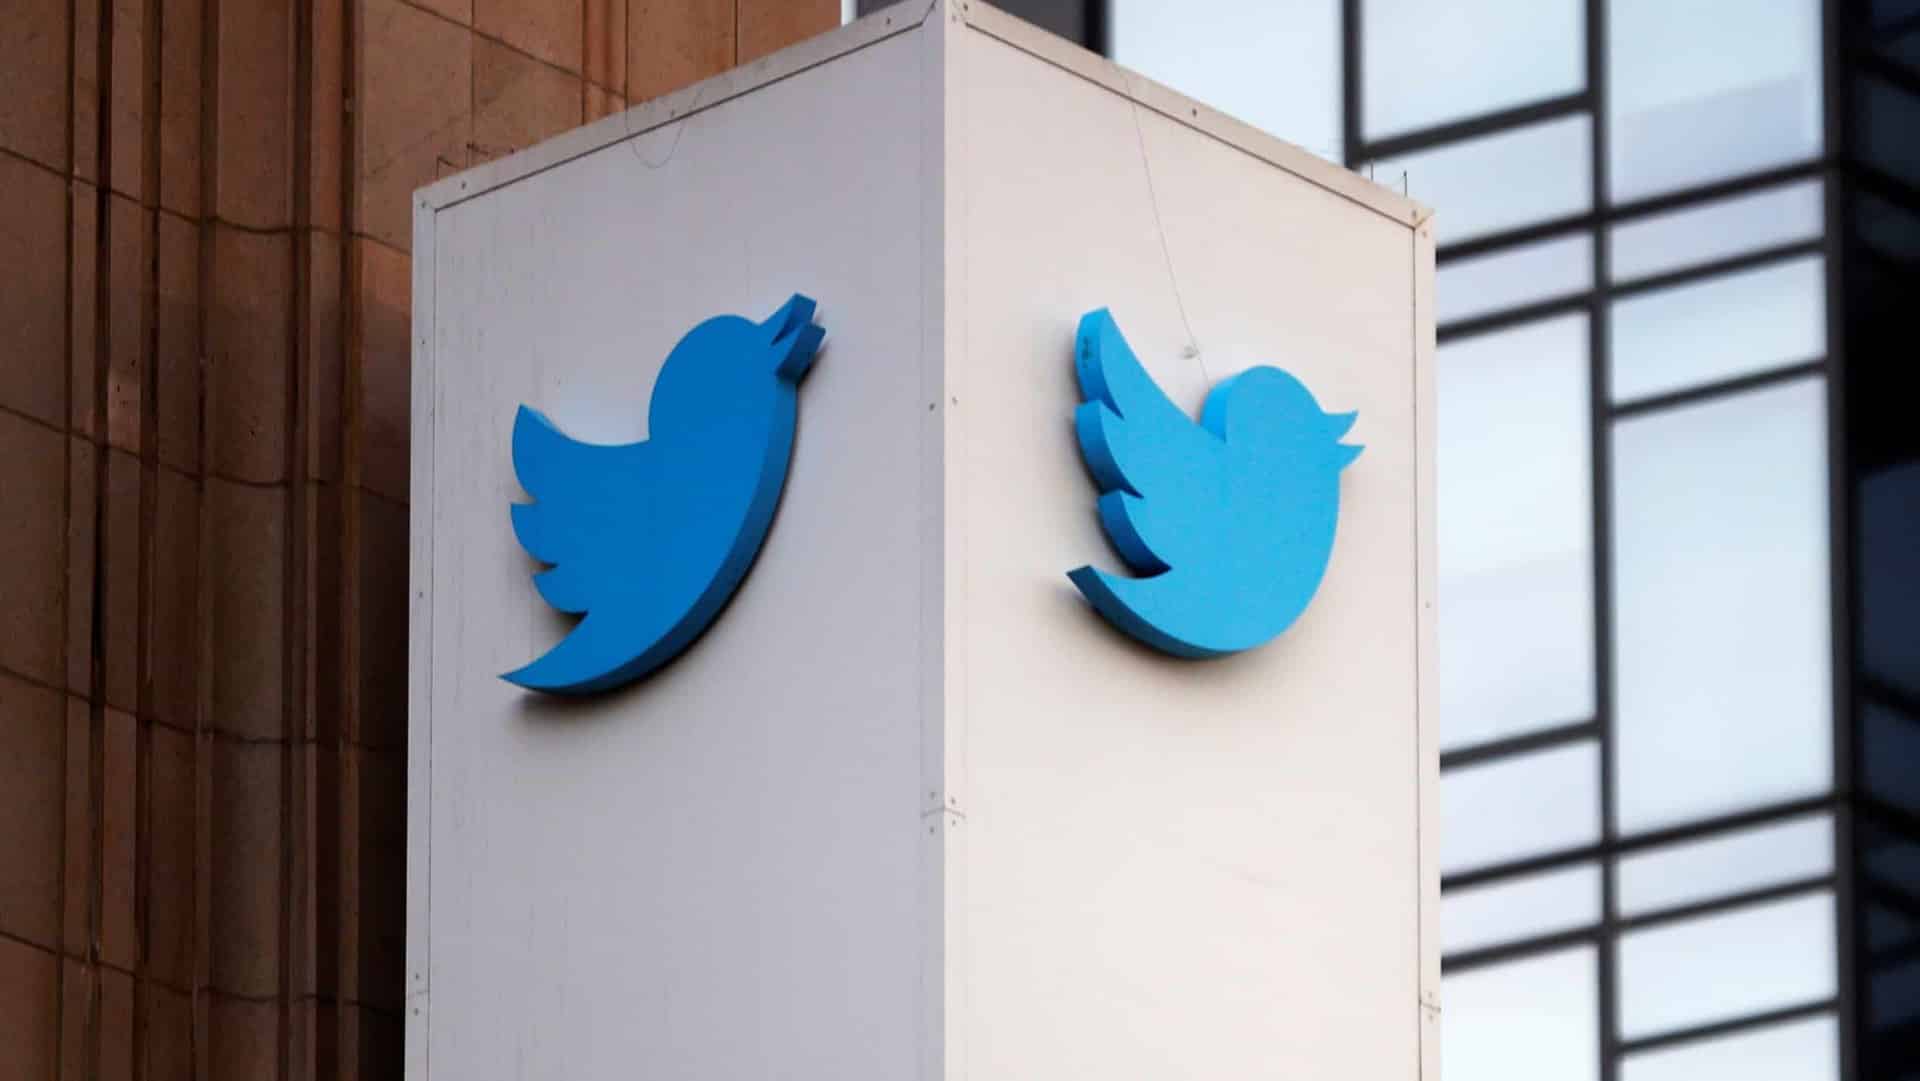 Twitter is testing 'Shops' feature to seize ecommerce opportunity